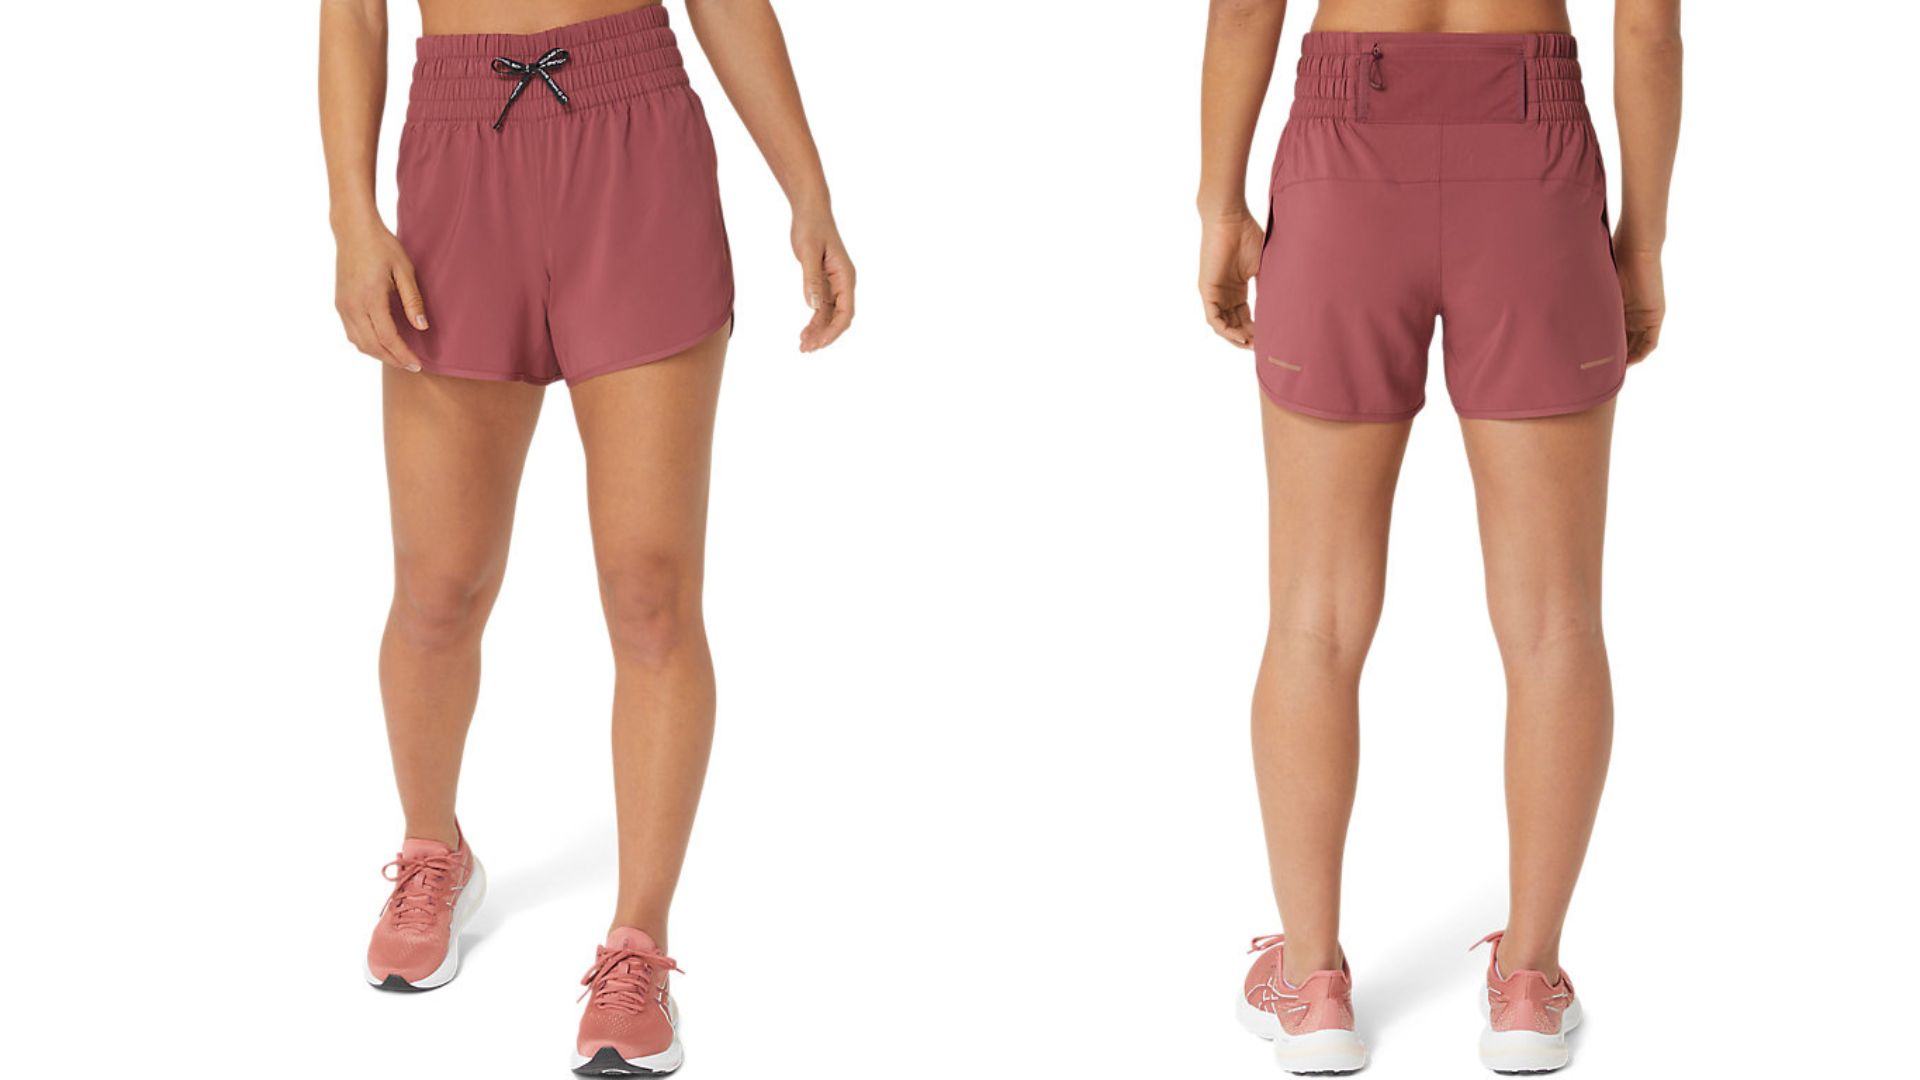 Asics Nagino 4in Run Short in brisket red worn by model, front and back view